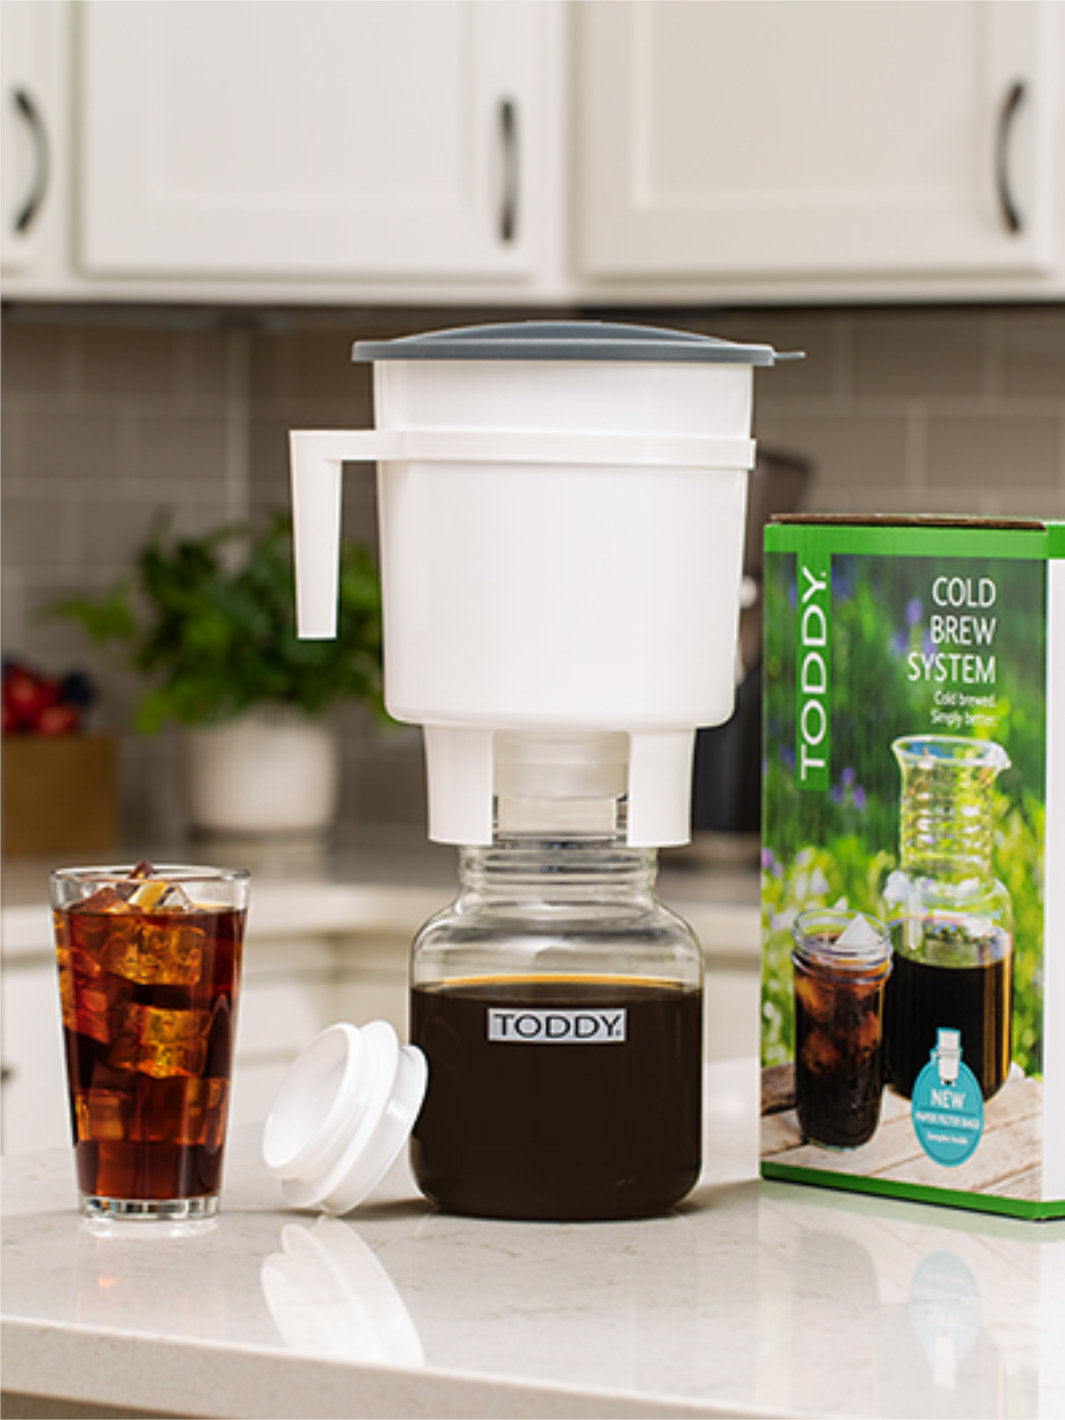 TODDY Home Cold Brew System – Someware